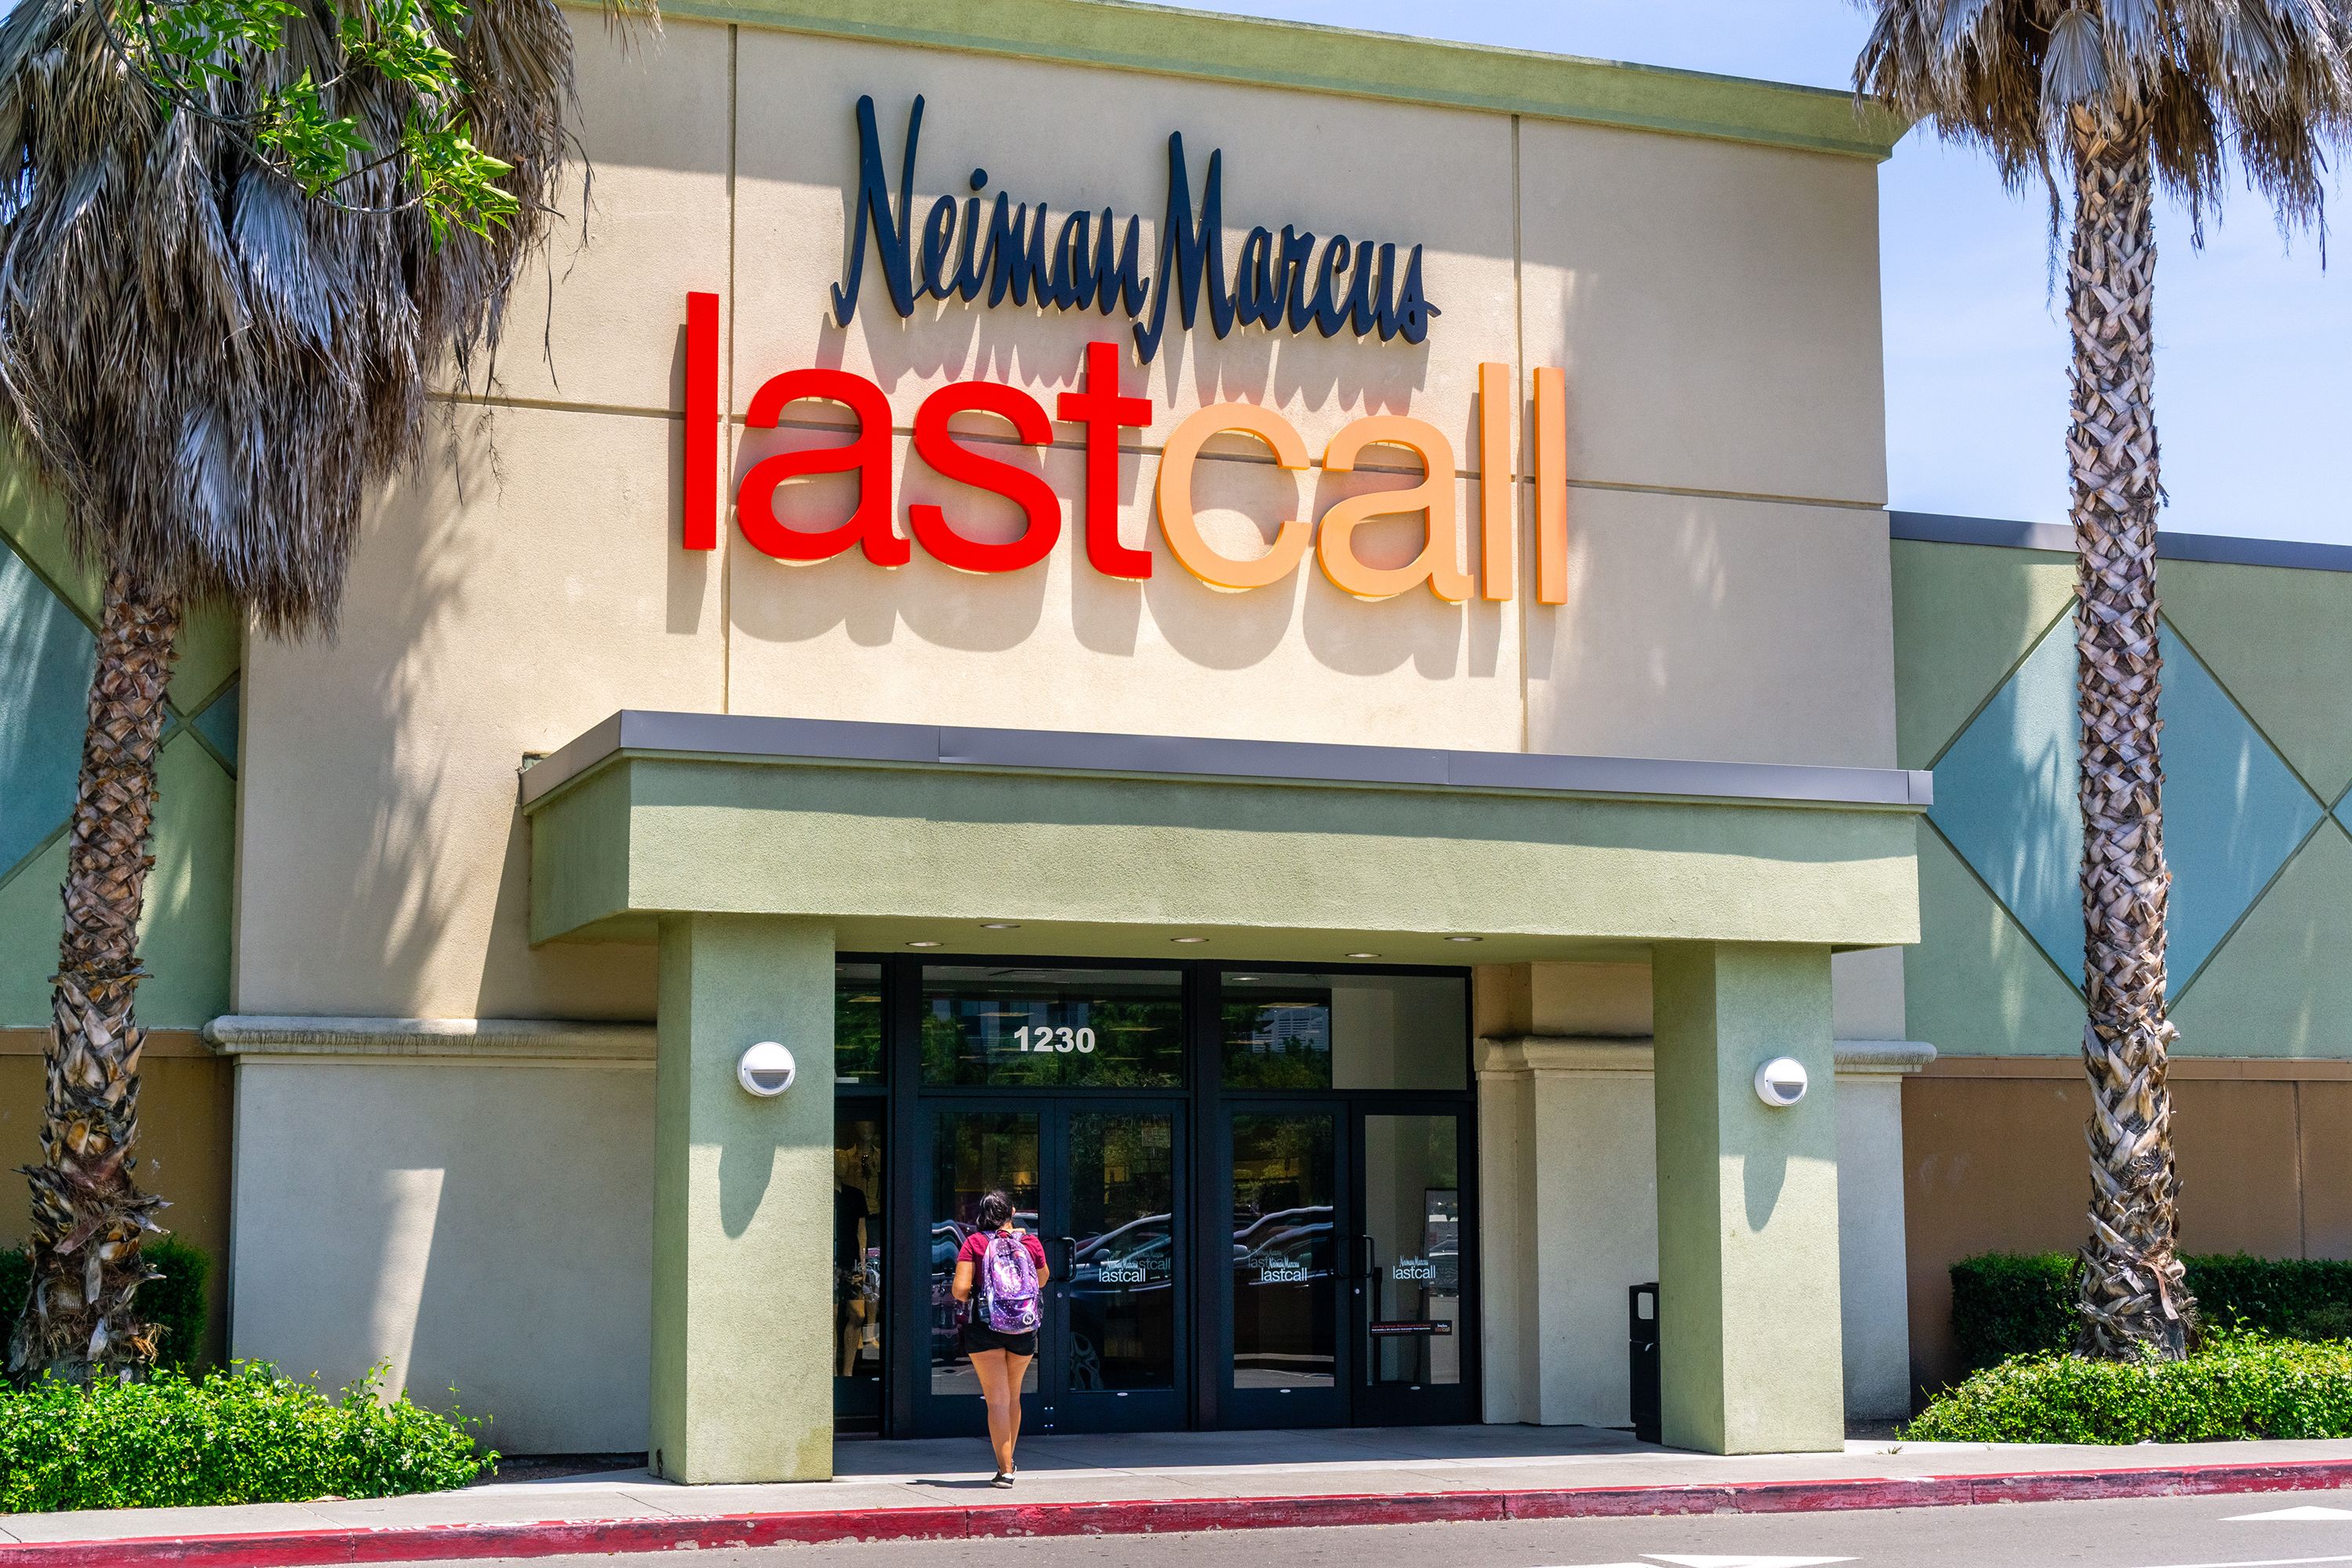 Neiman Marcus To Close Most Off-Price 'Last Call' Stores, Combine In-Store  And Online Teams - Retail TouchPoints